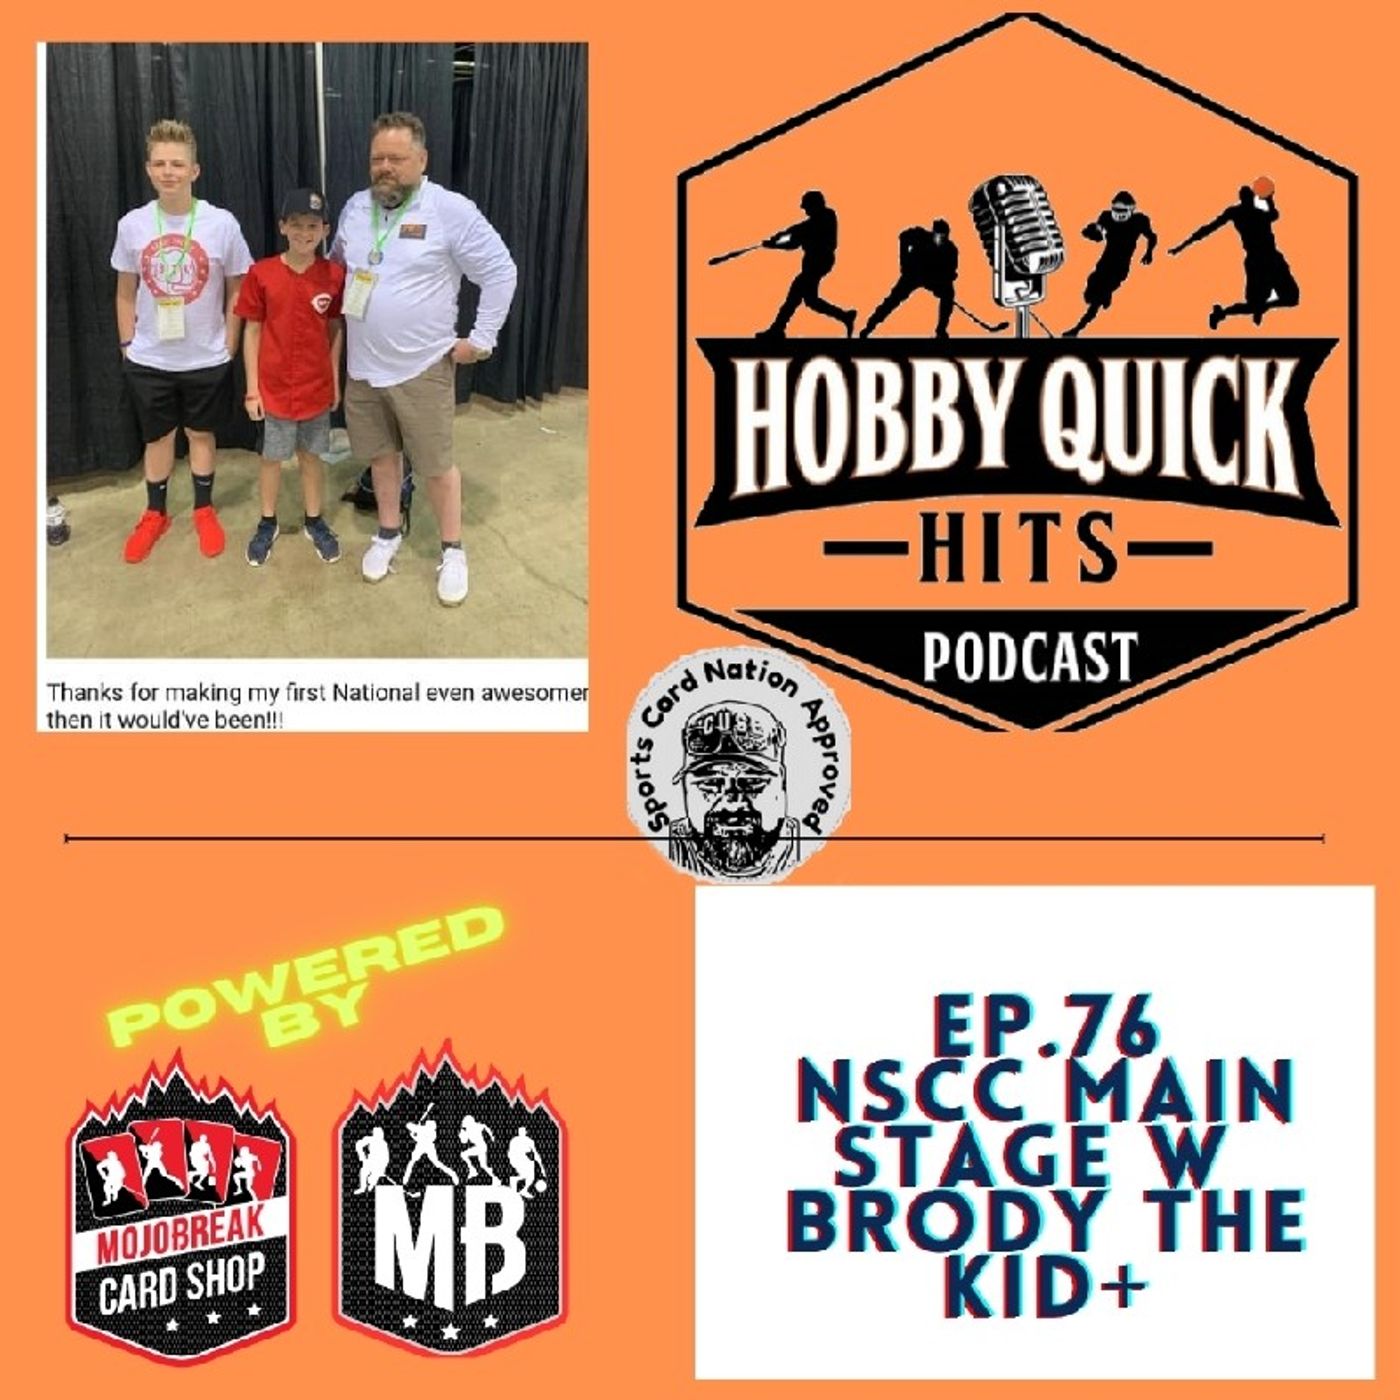 Hobby Quick Hits Ep.76 Live from the NSCC Main Stage w/Brody the Kid